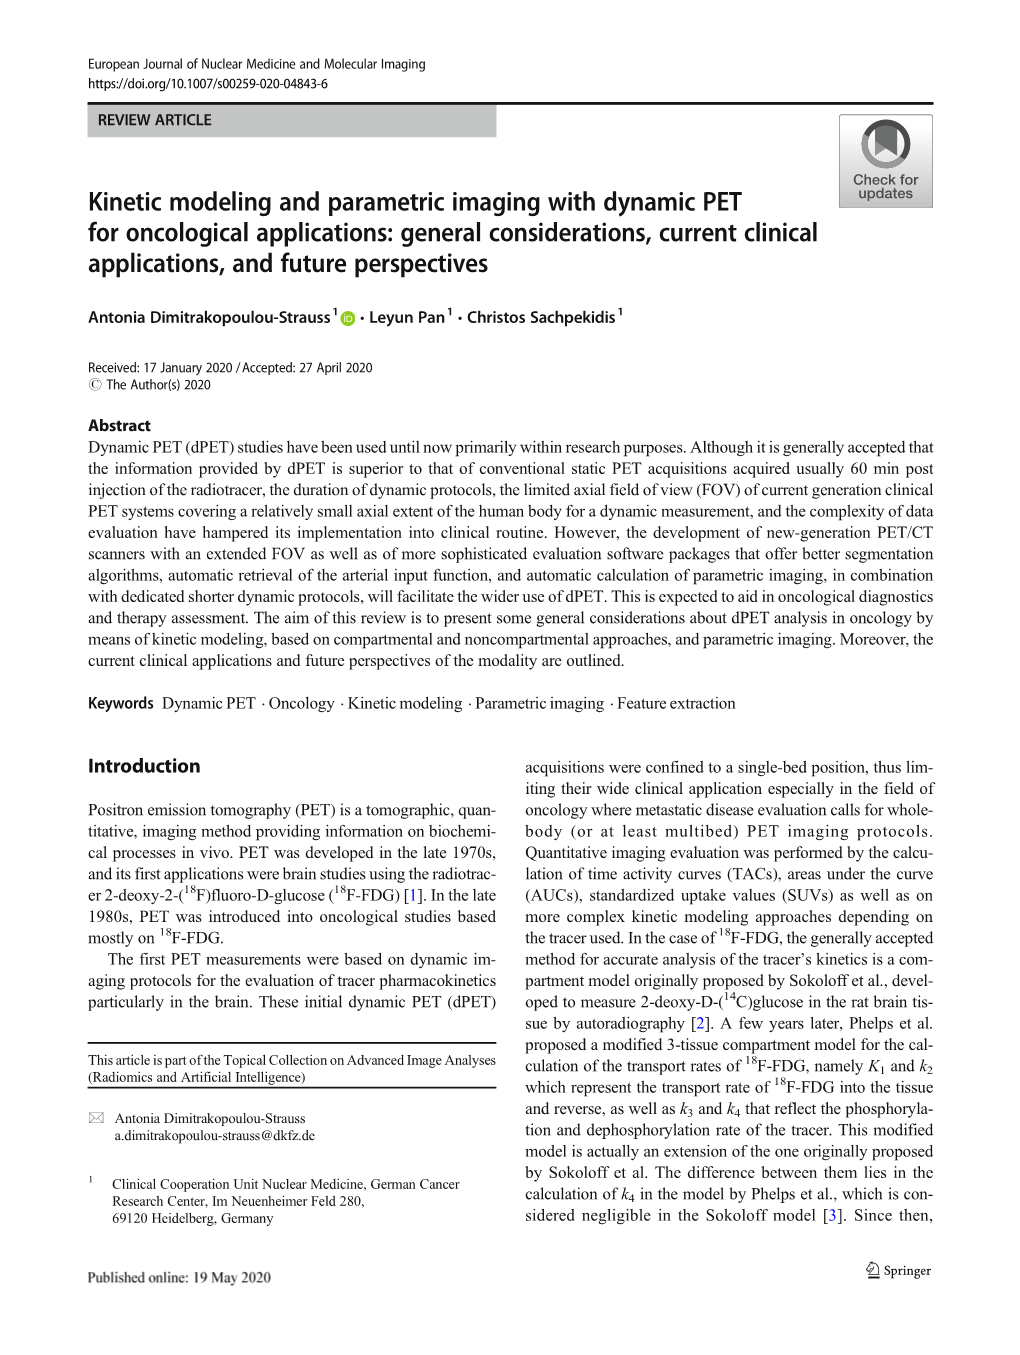 Kinetic Modeling and Parametric Imaging with Dynamic PET for Oncological Applications: General Considerations, Current Clinical Applications, and Future Perspectives